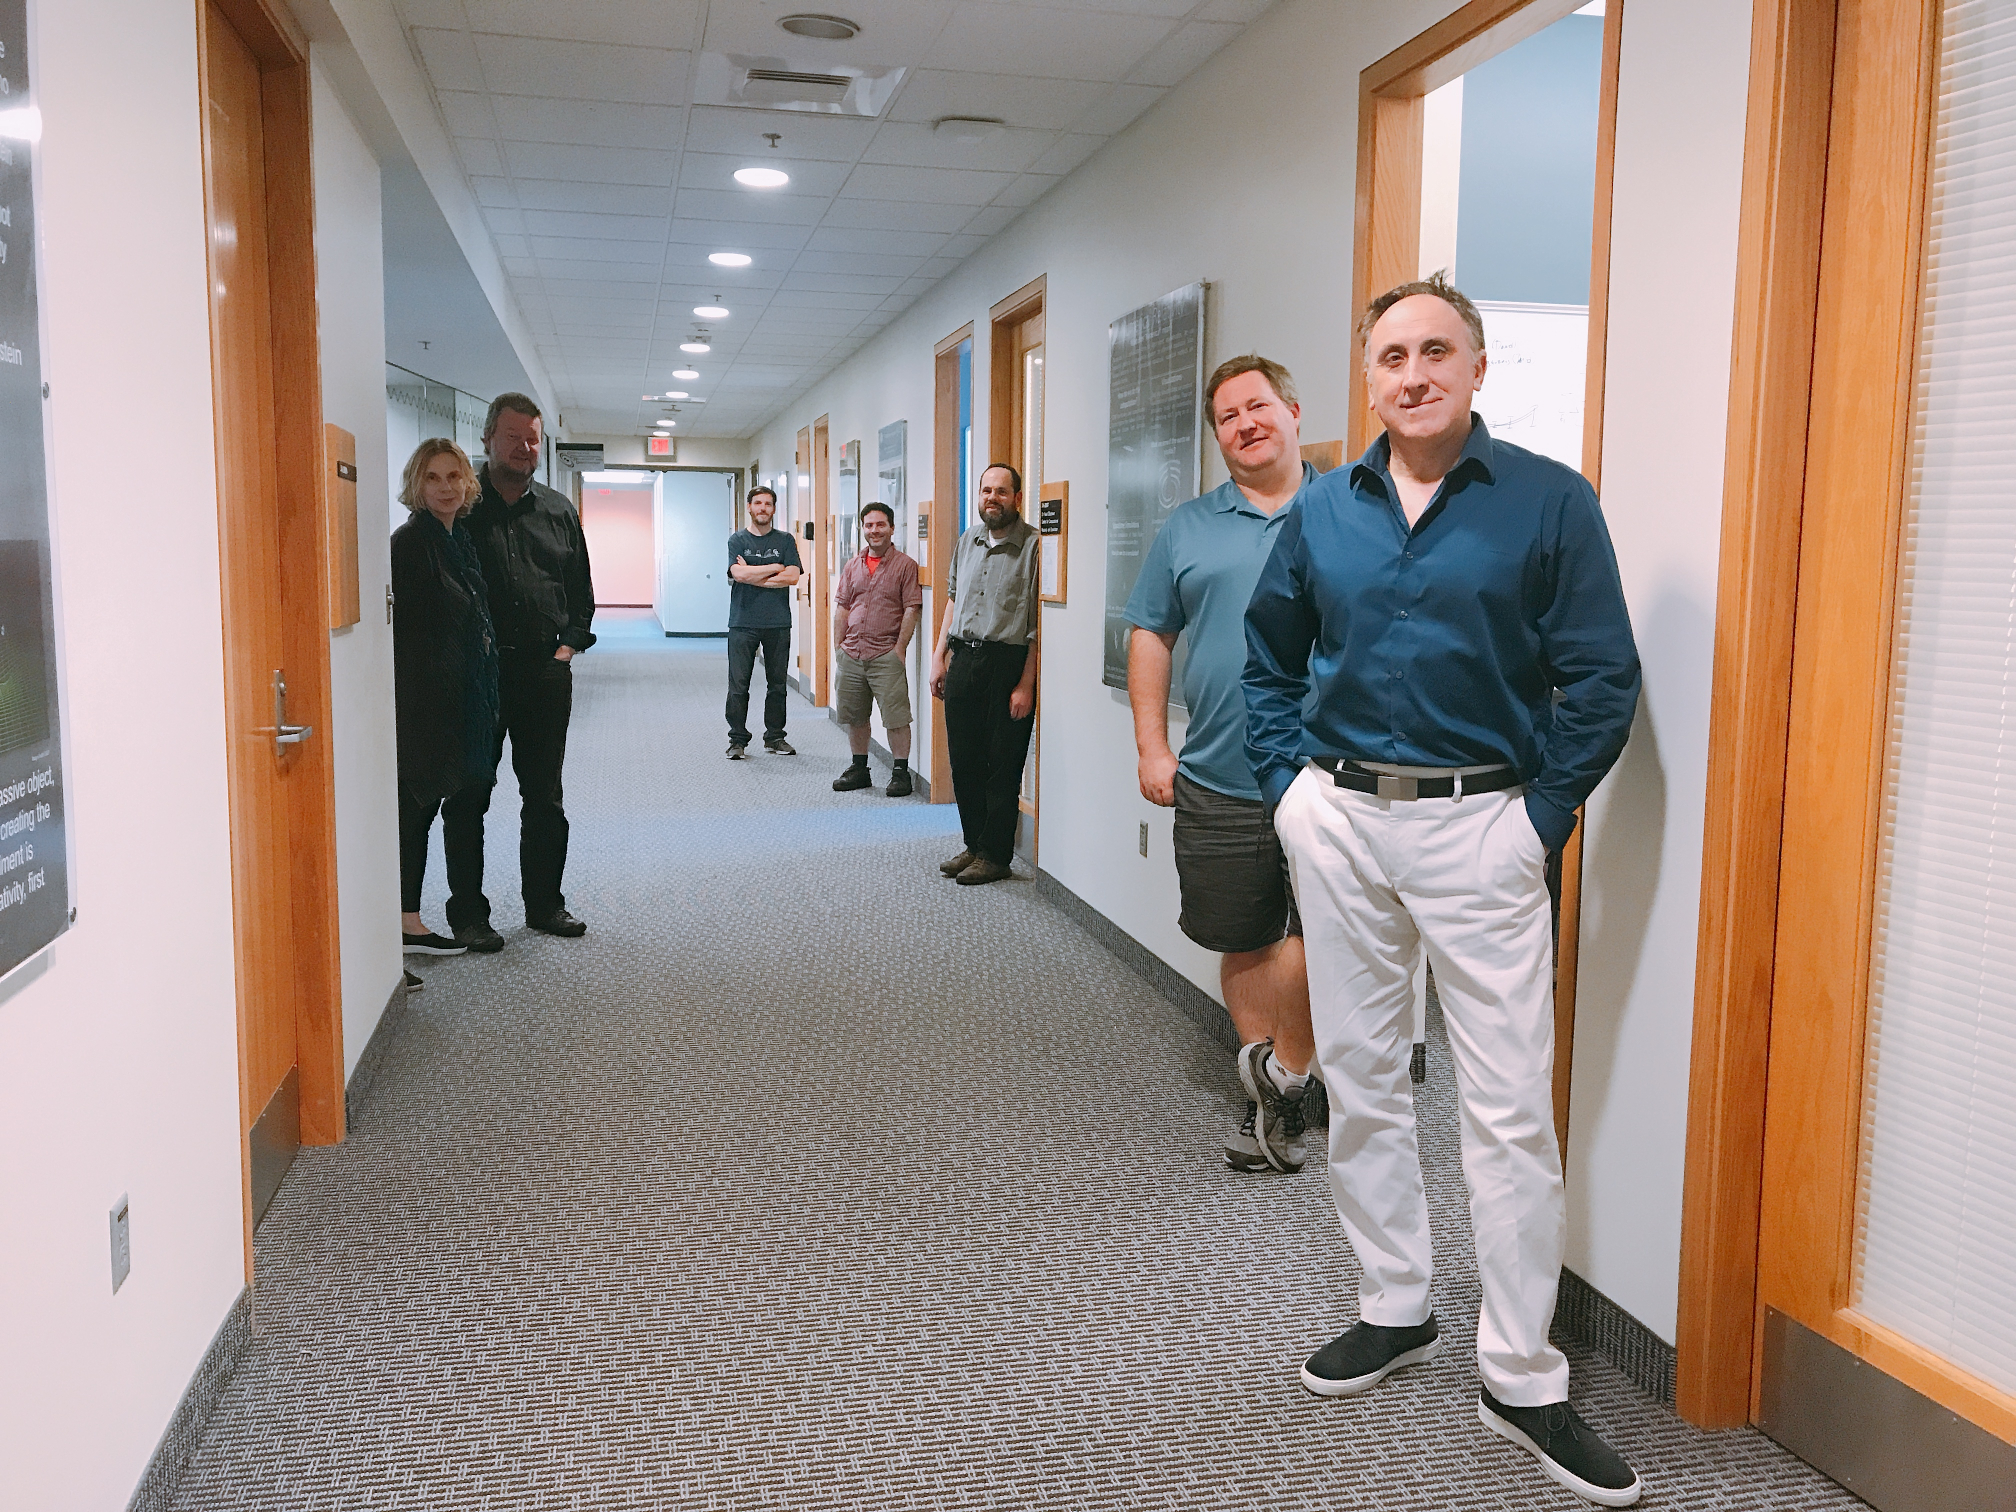 Main hallway of the CCRG, with faculty standing by their offices (right) and some faculty with offices elsewhere (left).